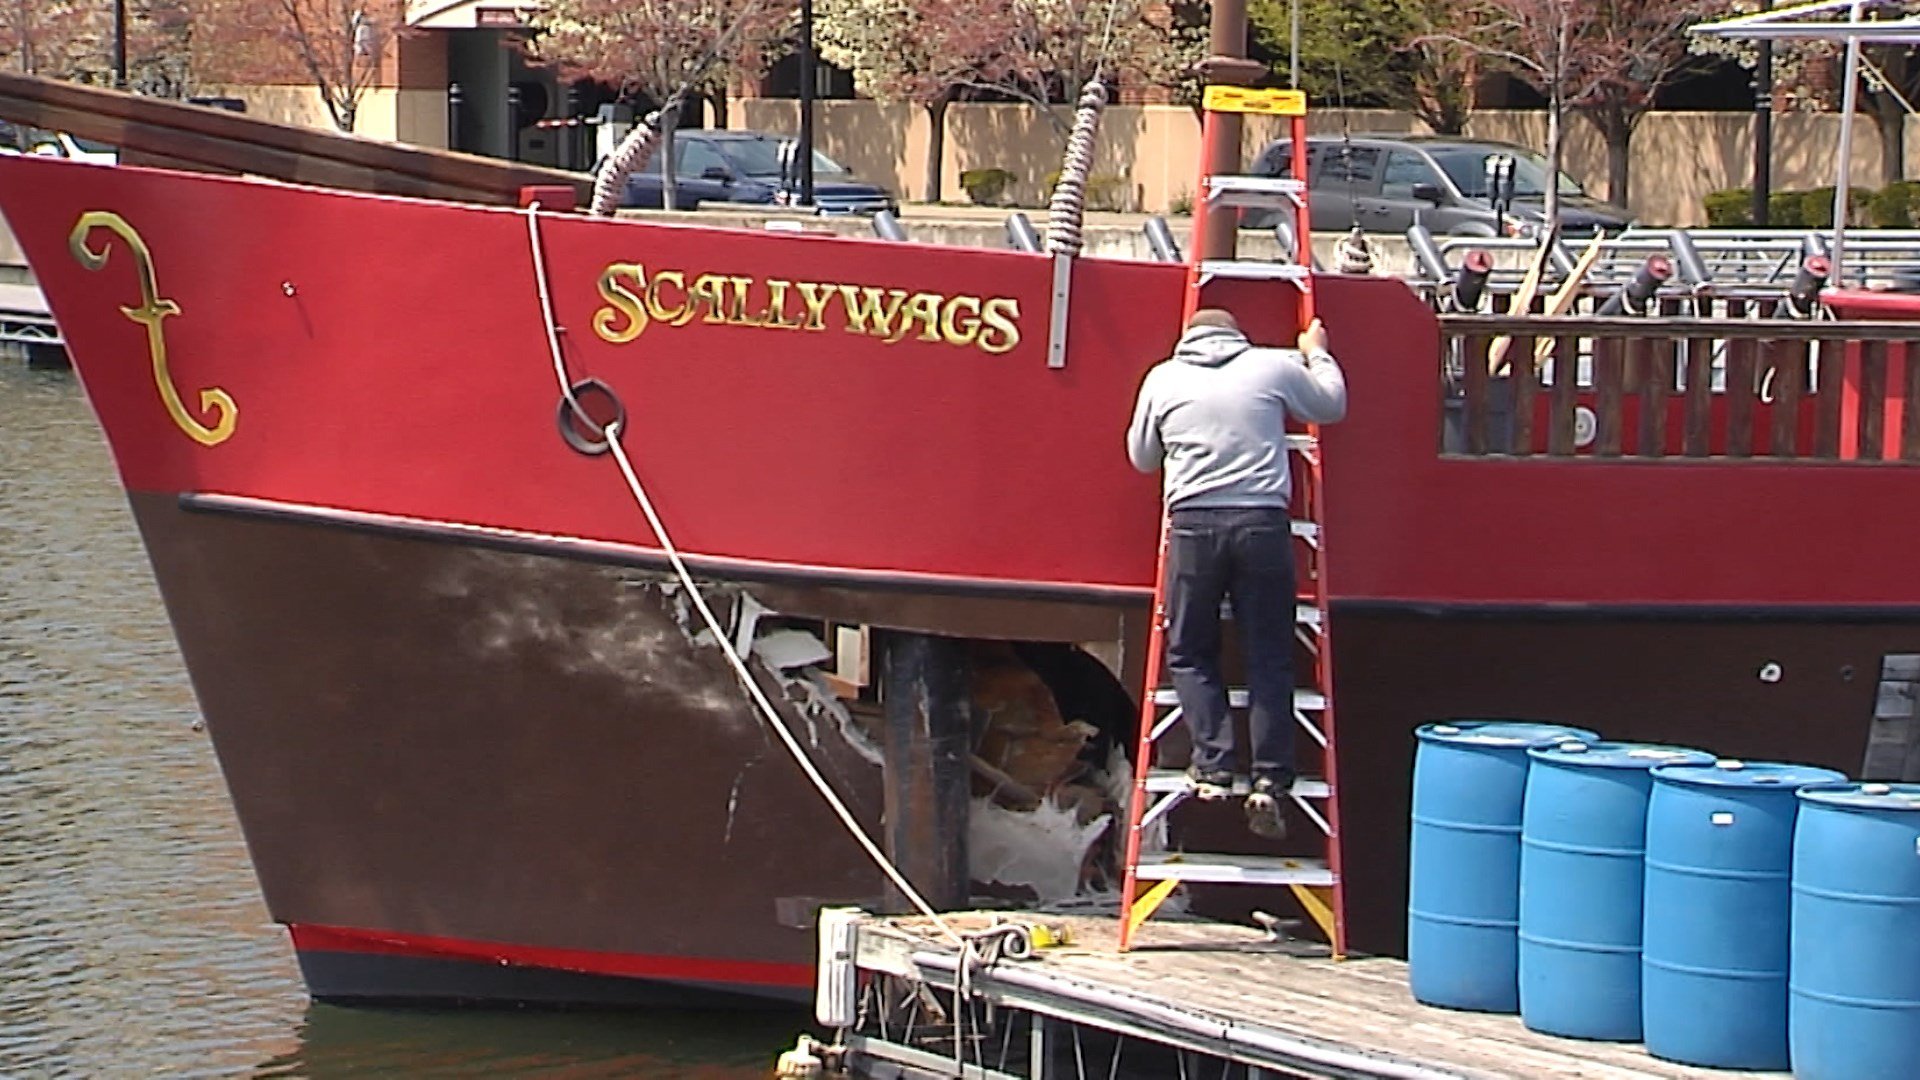 Scallywags to Open in Mid-Late June Due to Ongoing Ship Repairs